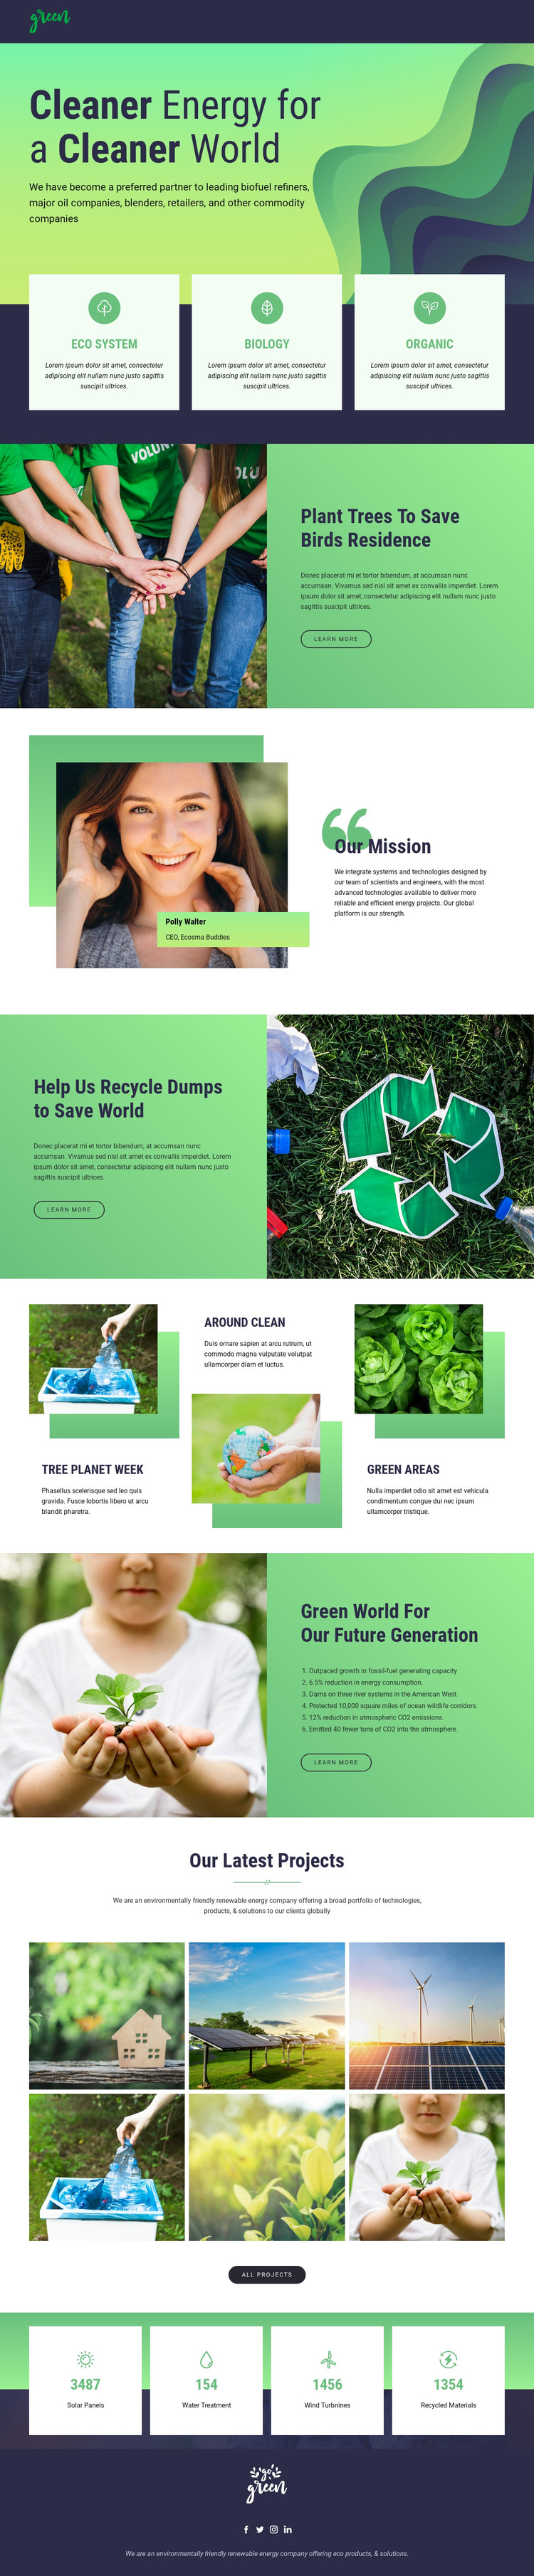 Clean energy to save nature Web Design